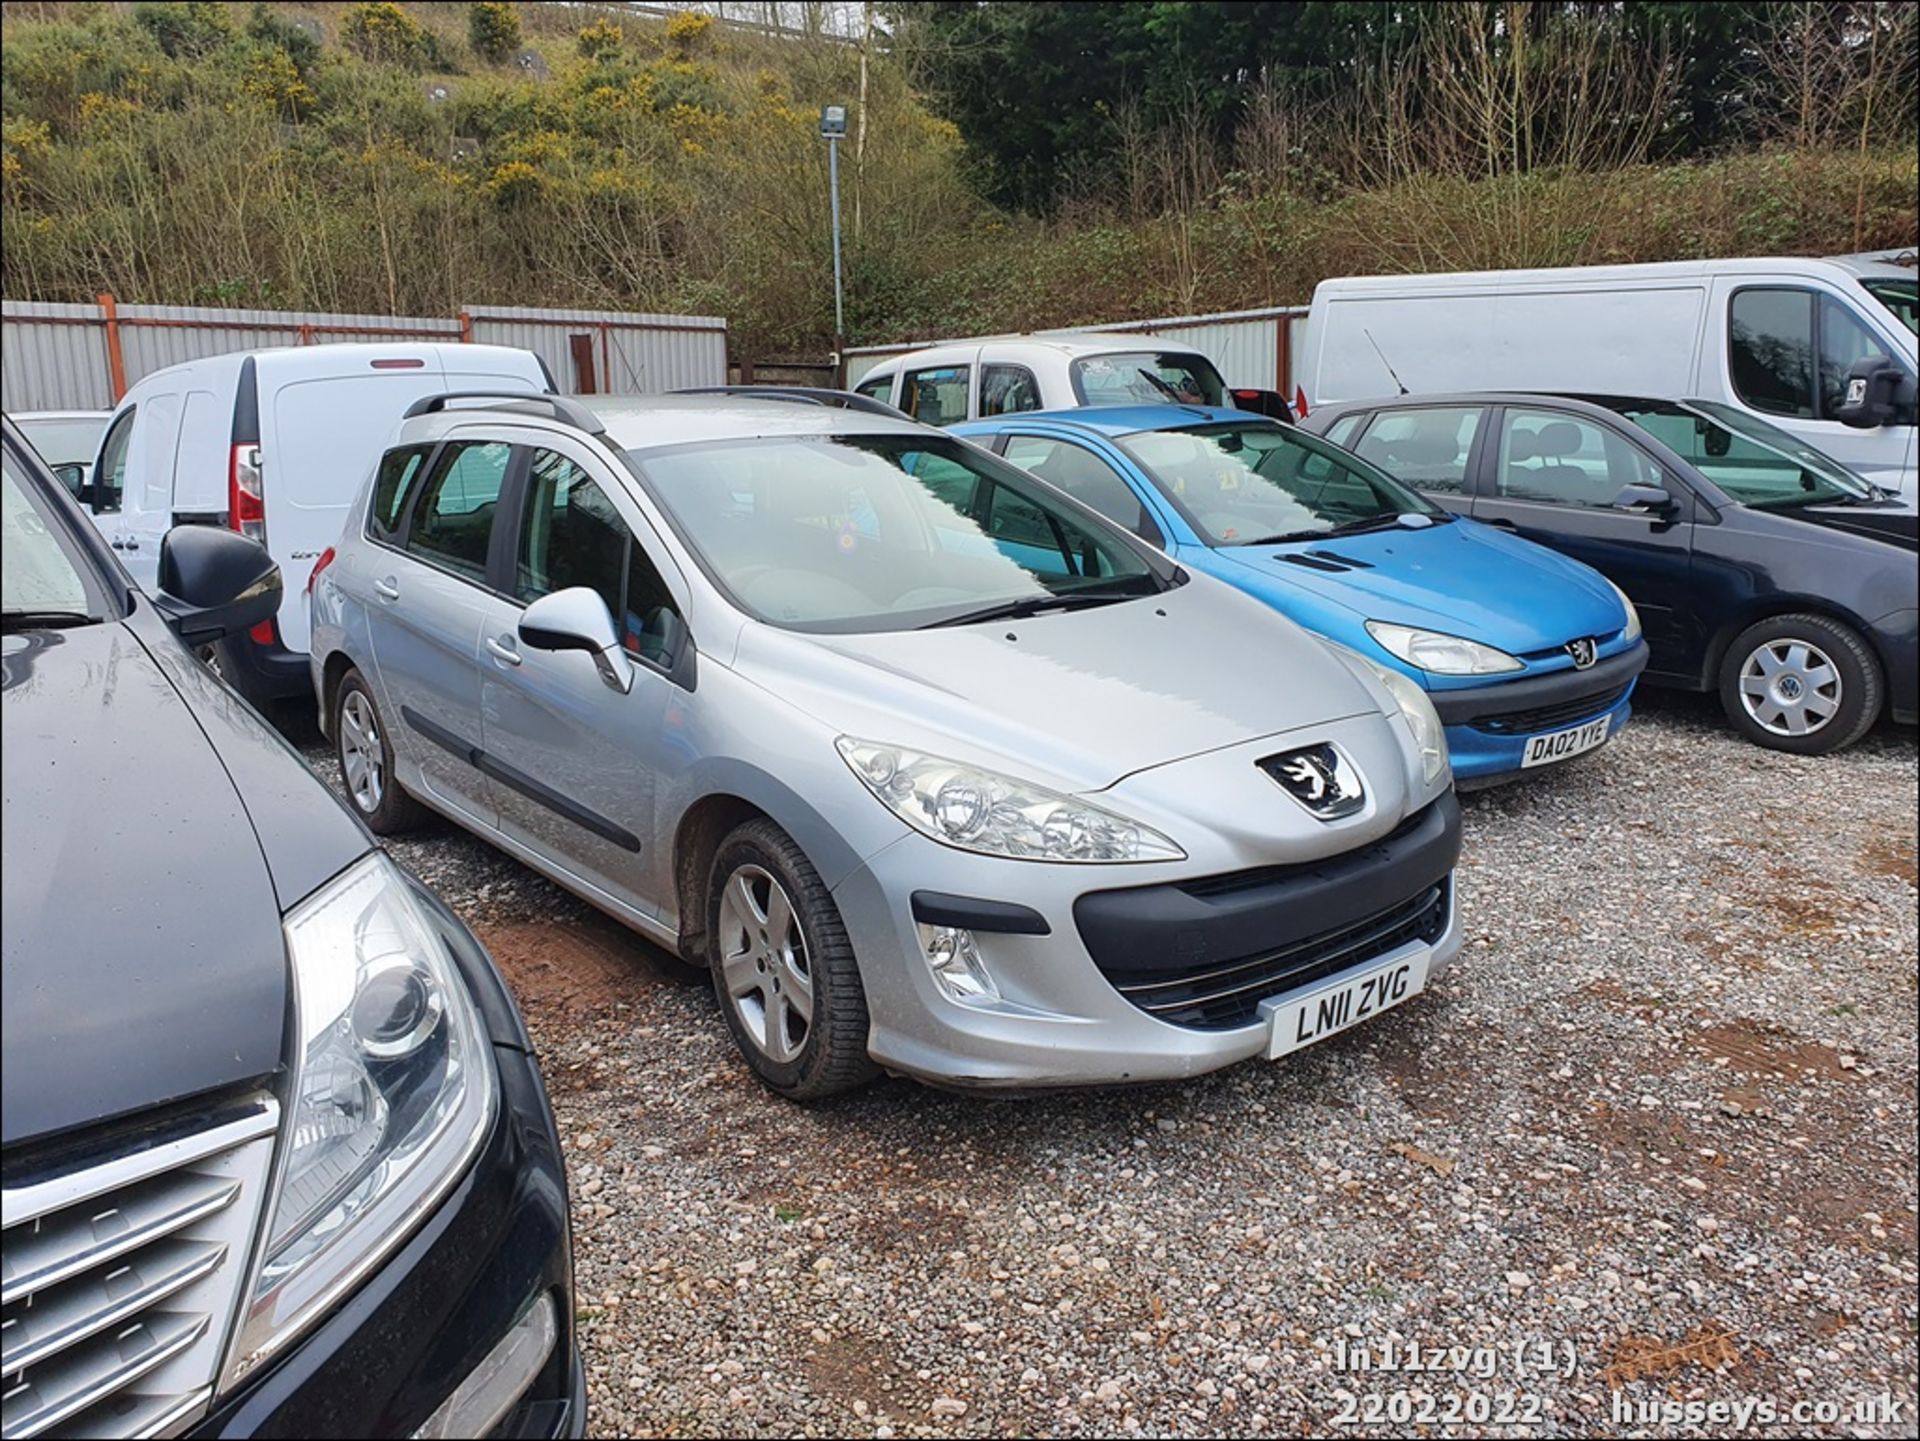 11/11 PEUGEOT 308 S SW HDI 92 - 1560cc 5dr Estate (Silver, 115k) - Image 3 of 46